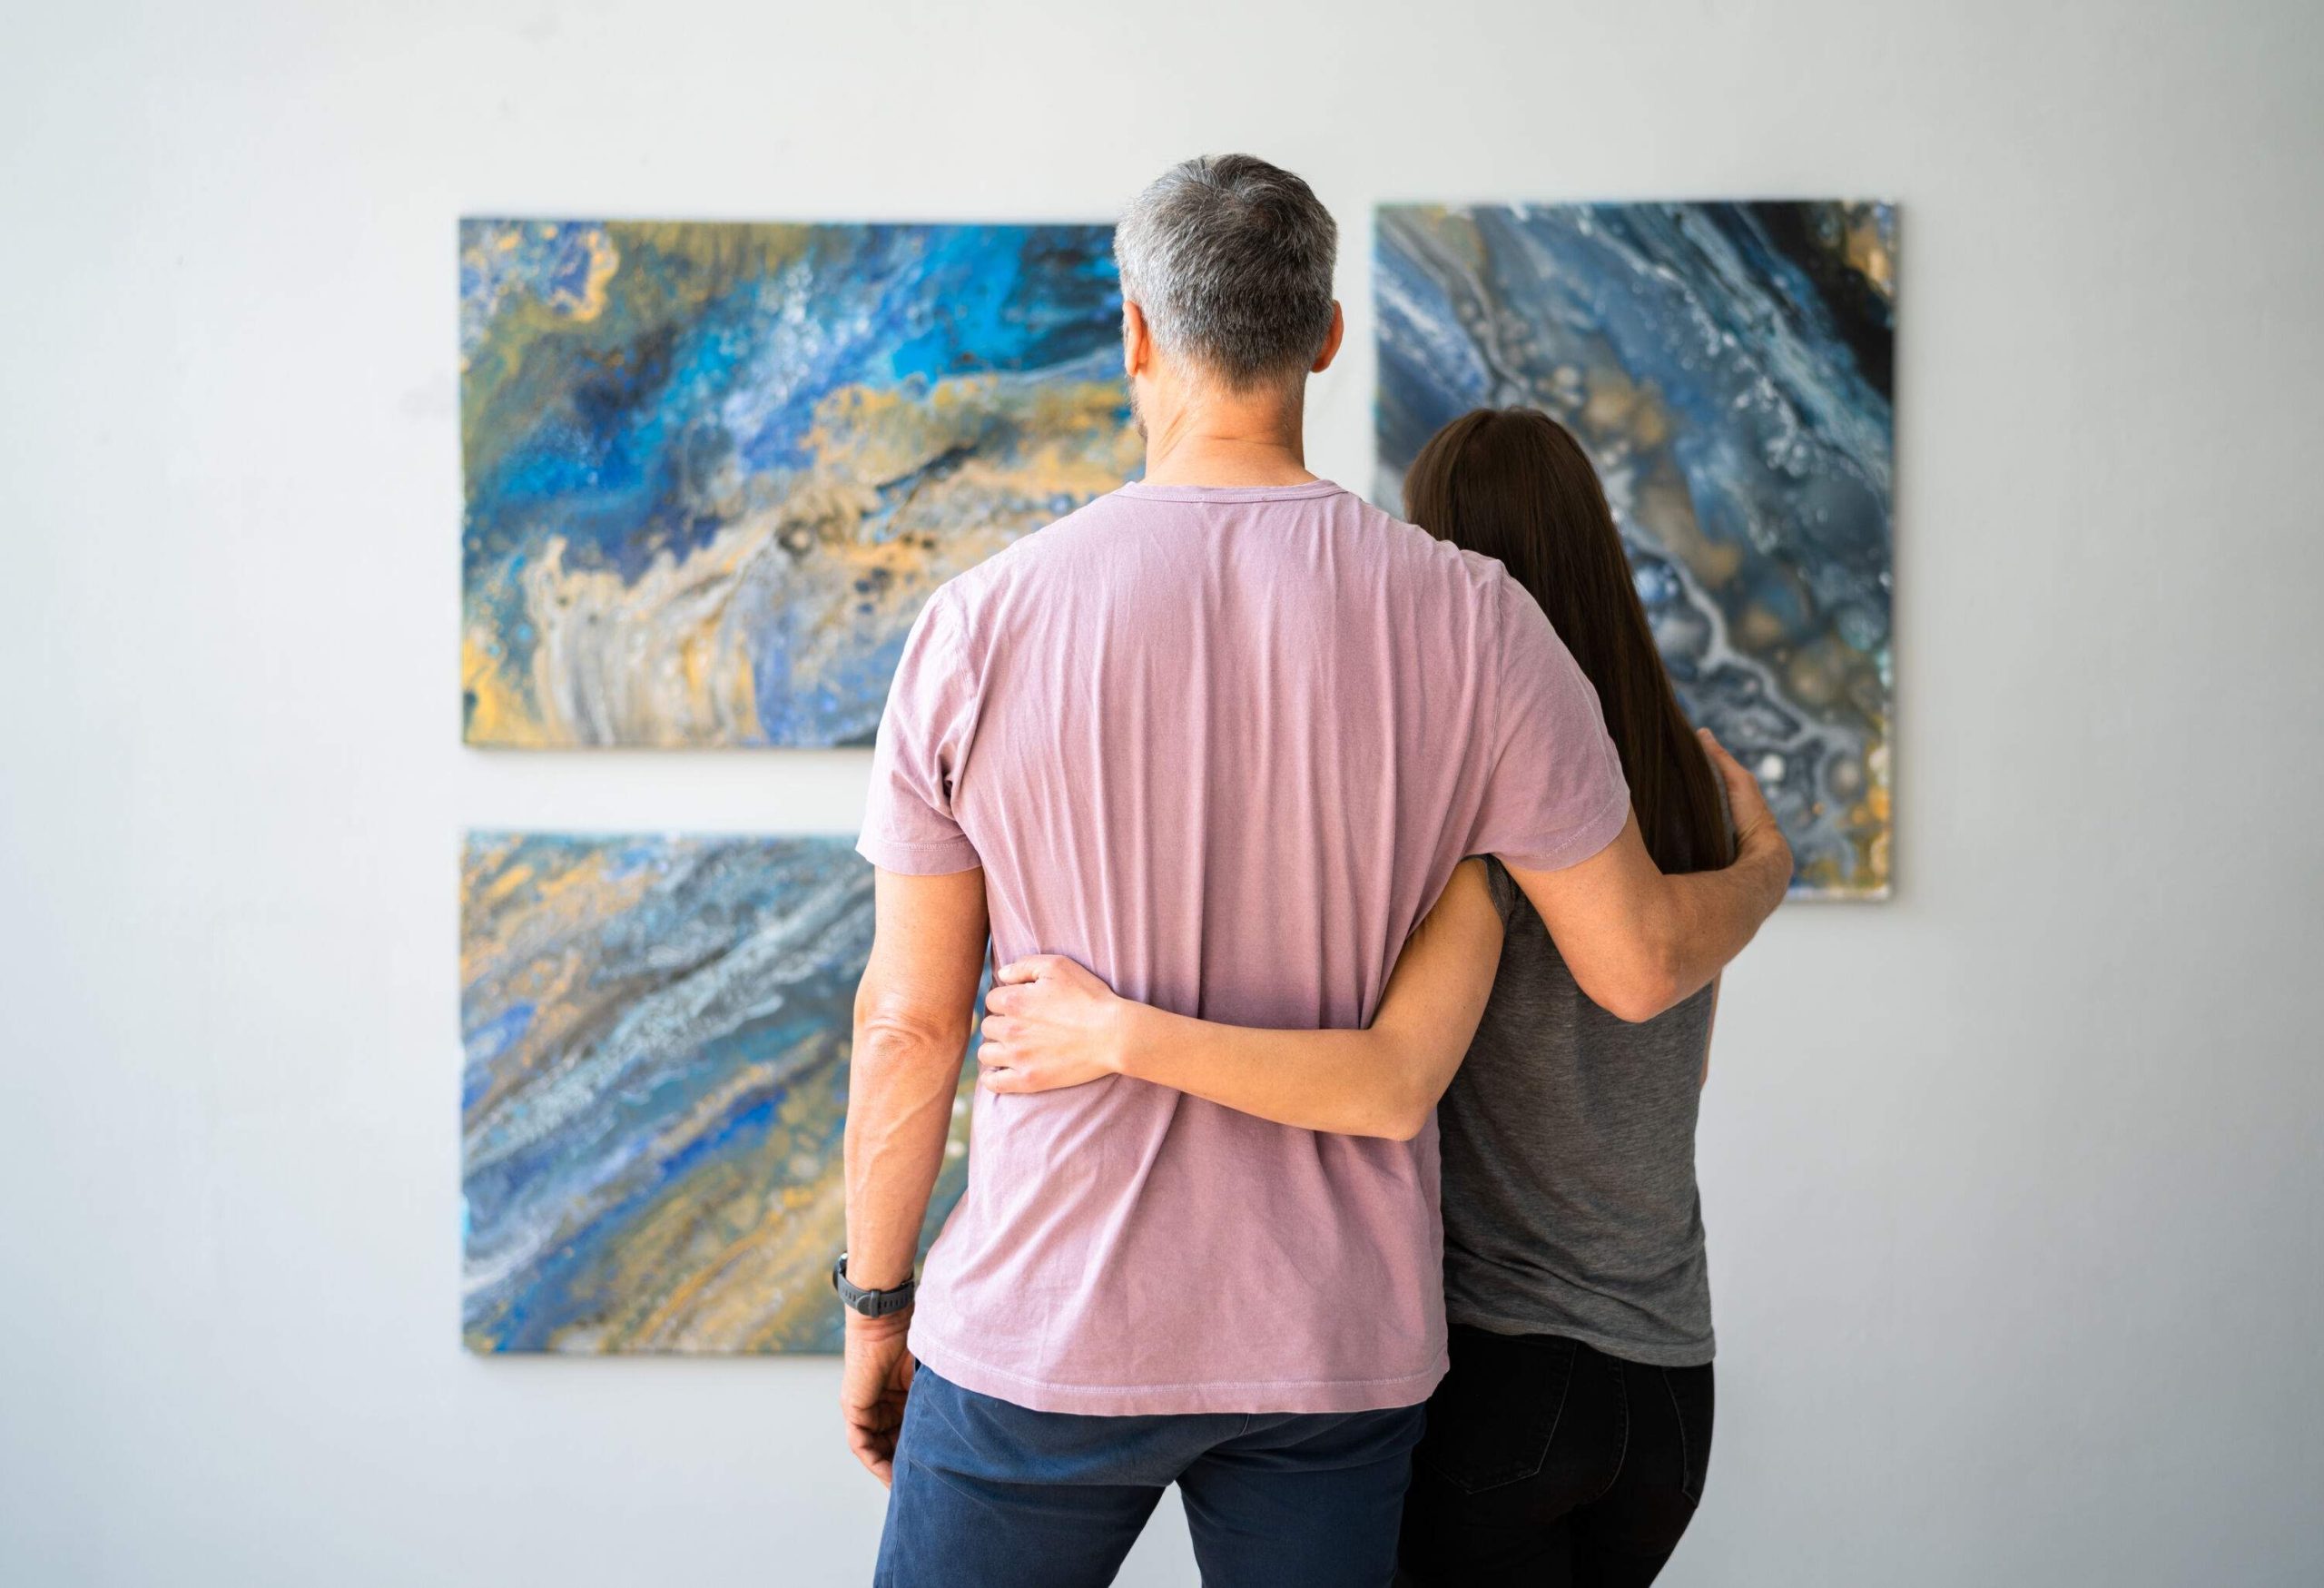 A man and a woman with arms around each other looking at paintings on the wall.